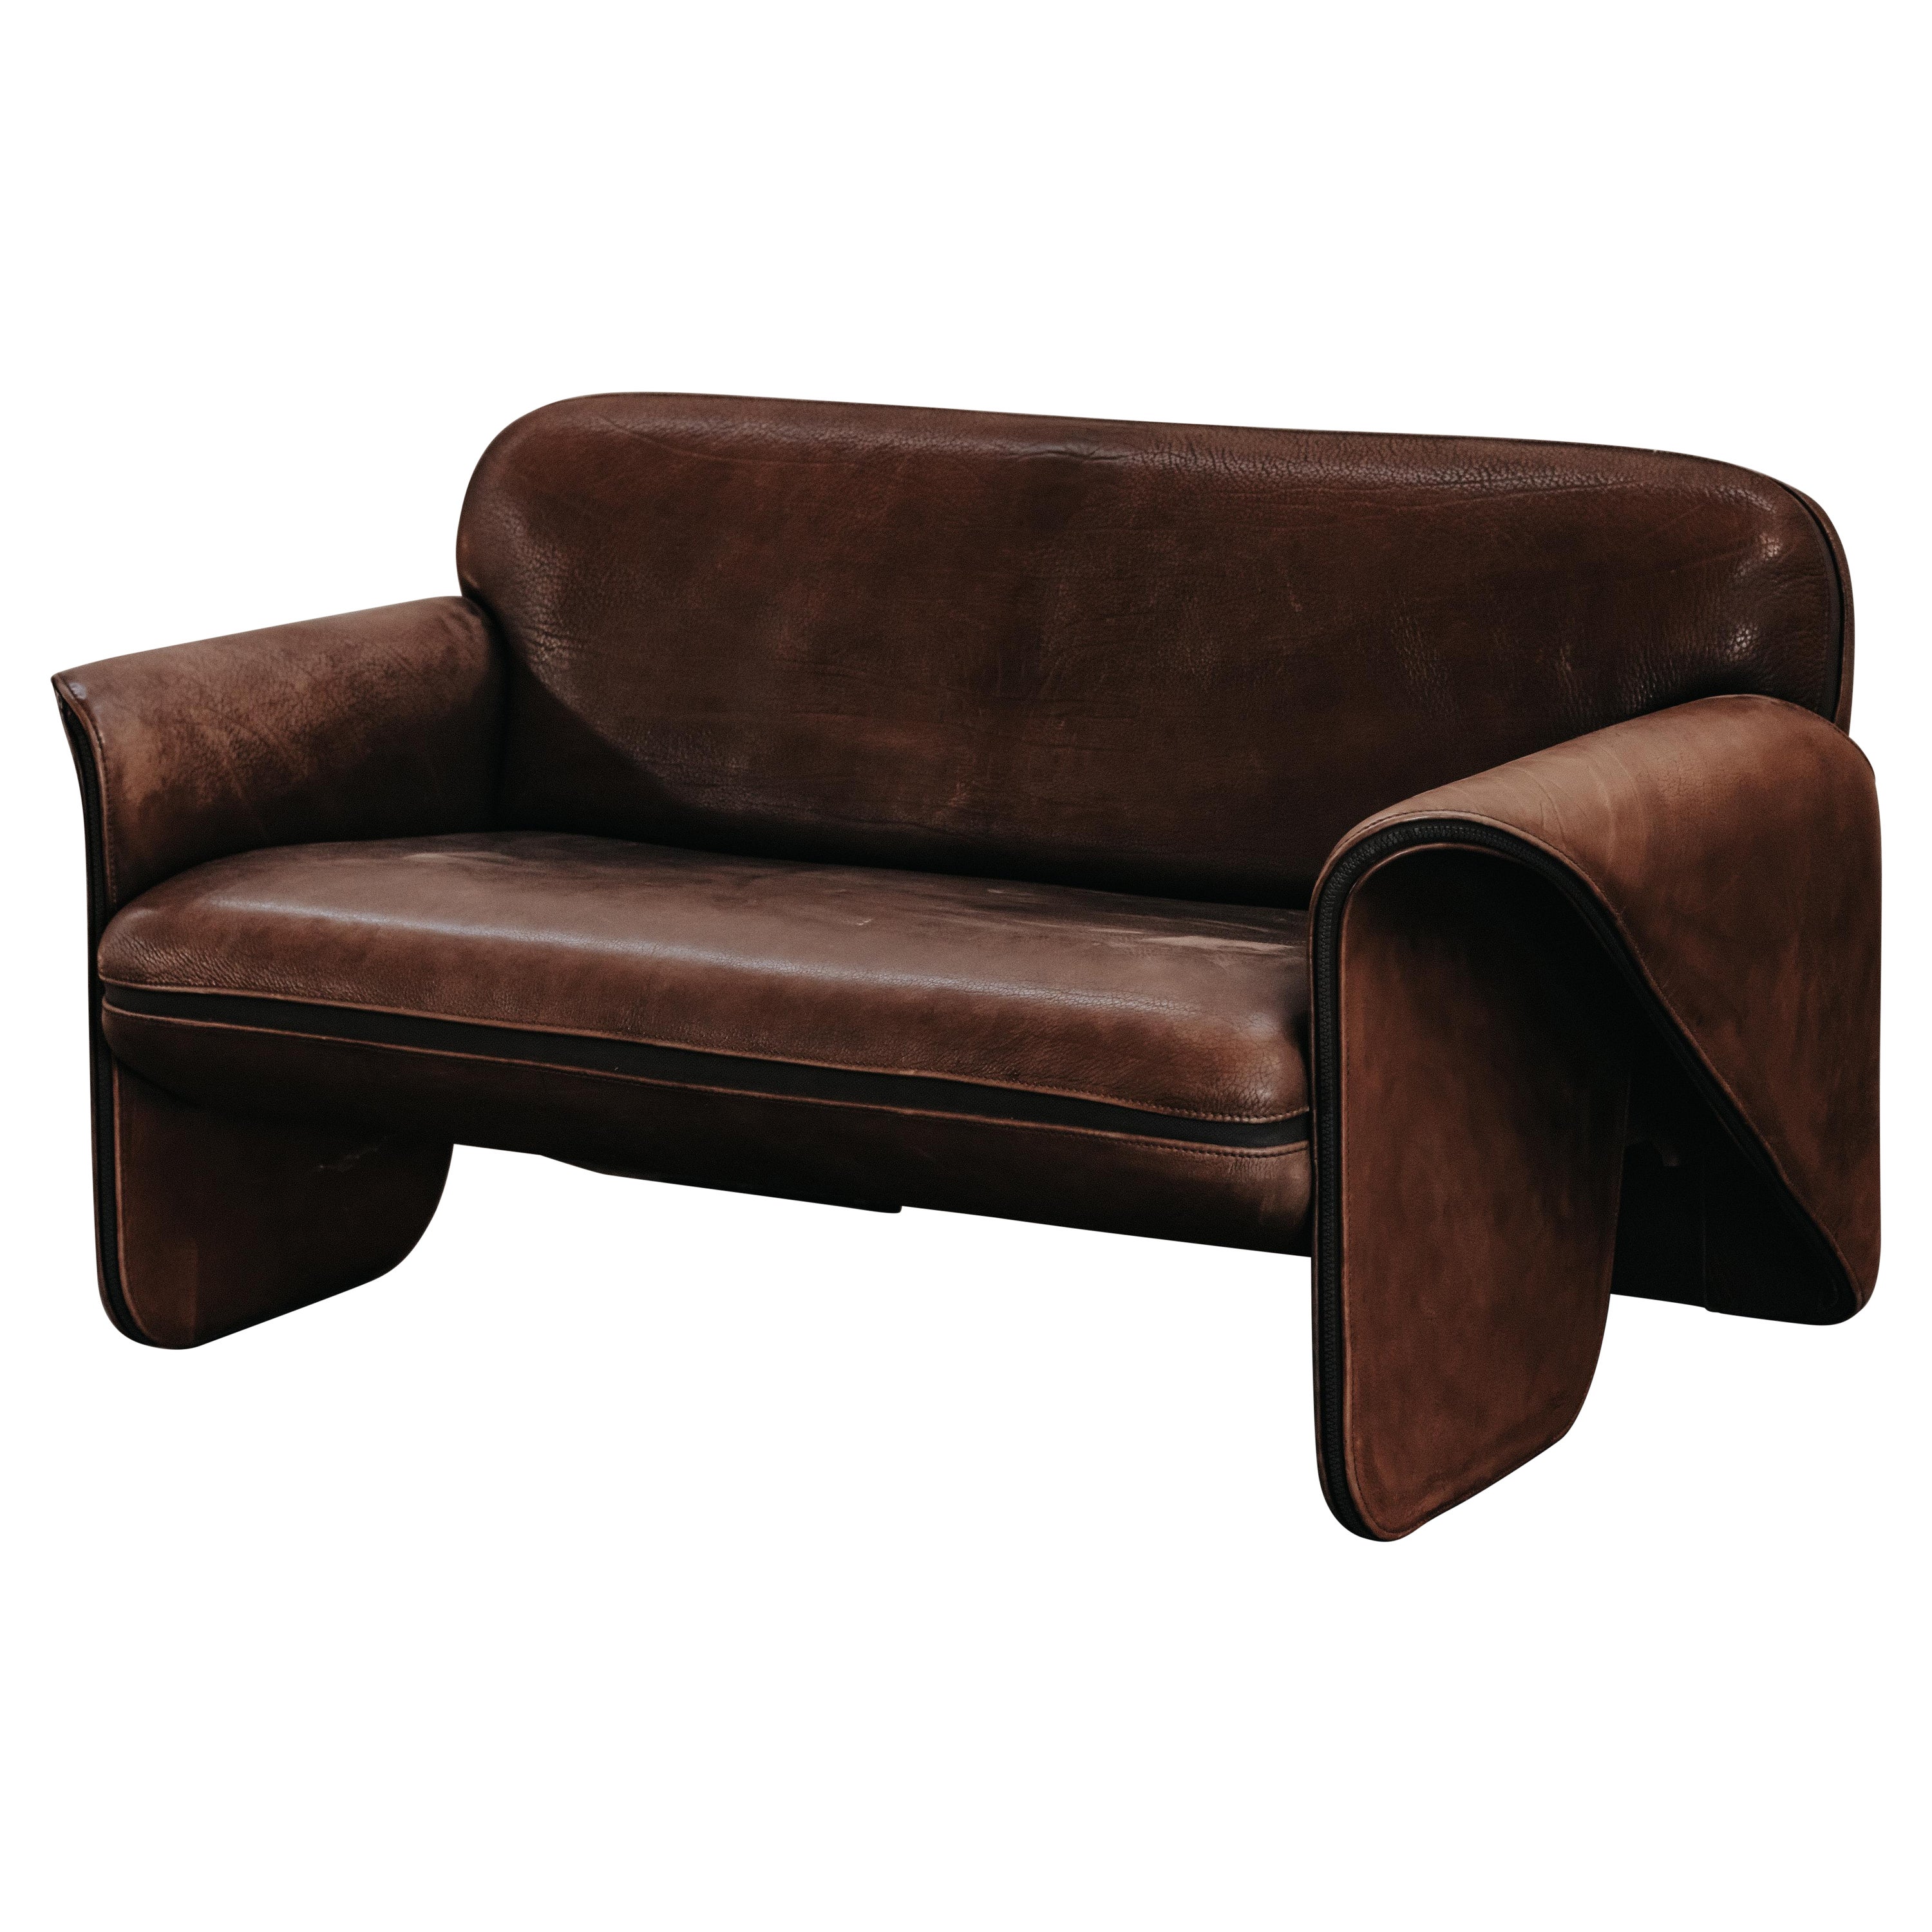 Vintage Brown Leather De Sede DS125 Sofa From Switzerland, Circa 1970 For Sale